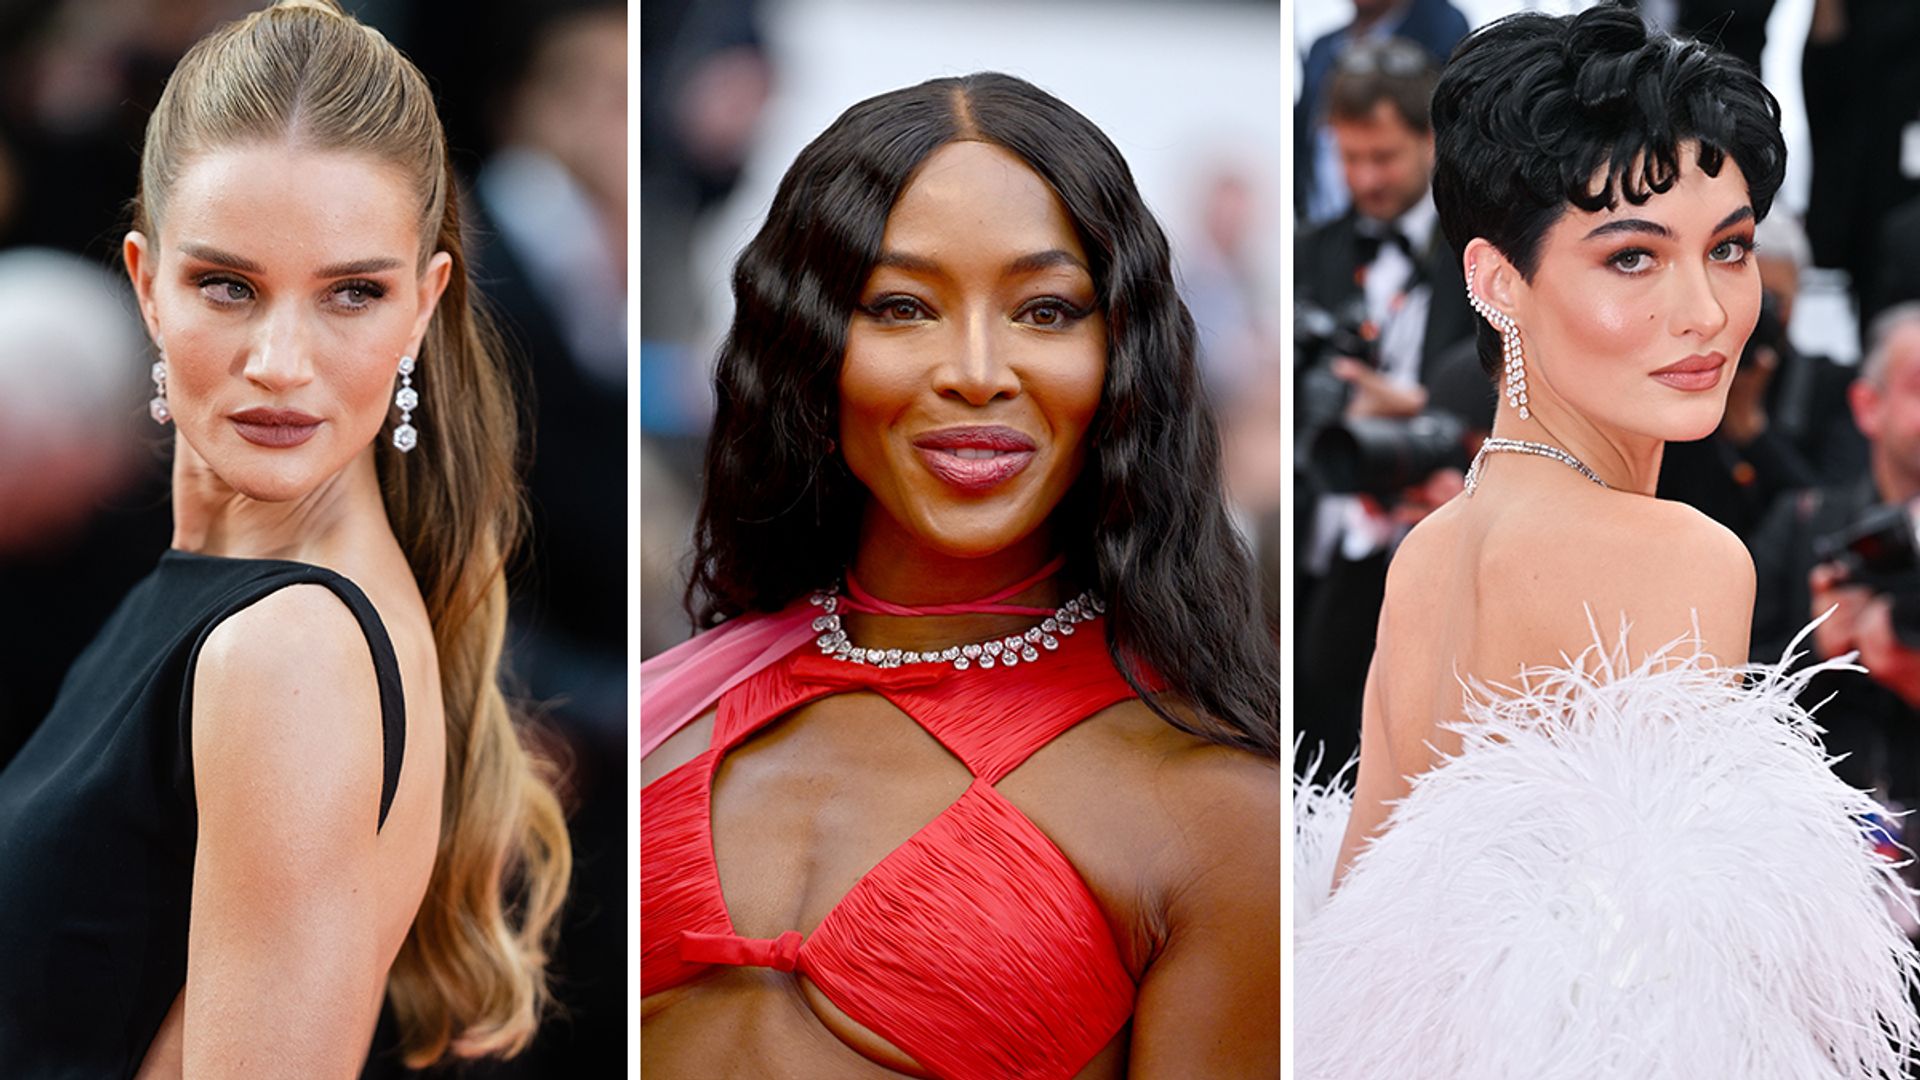 Rosie Huntington-Whiteley, Naomi Campbell and Grace Elizabeth looking glamorous at Cannes Film Festival 